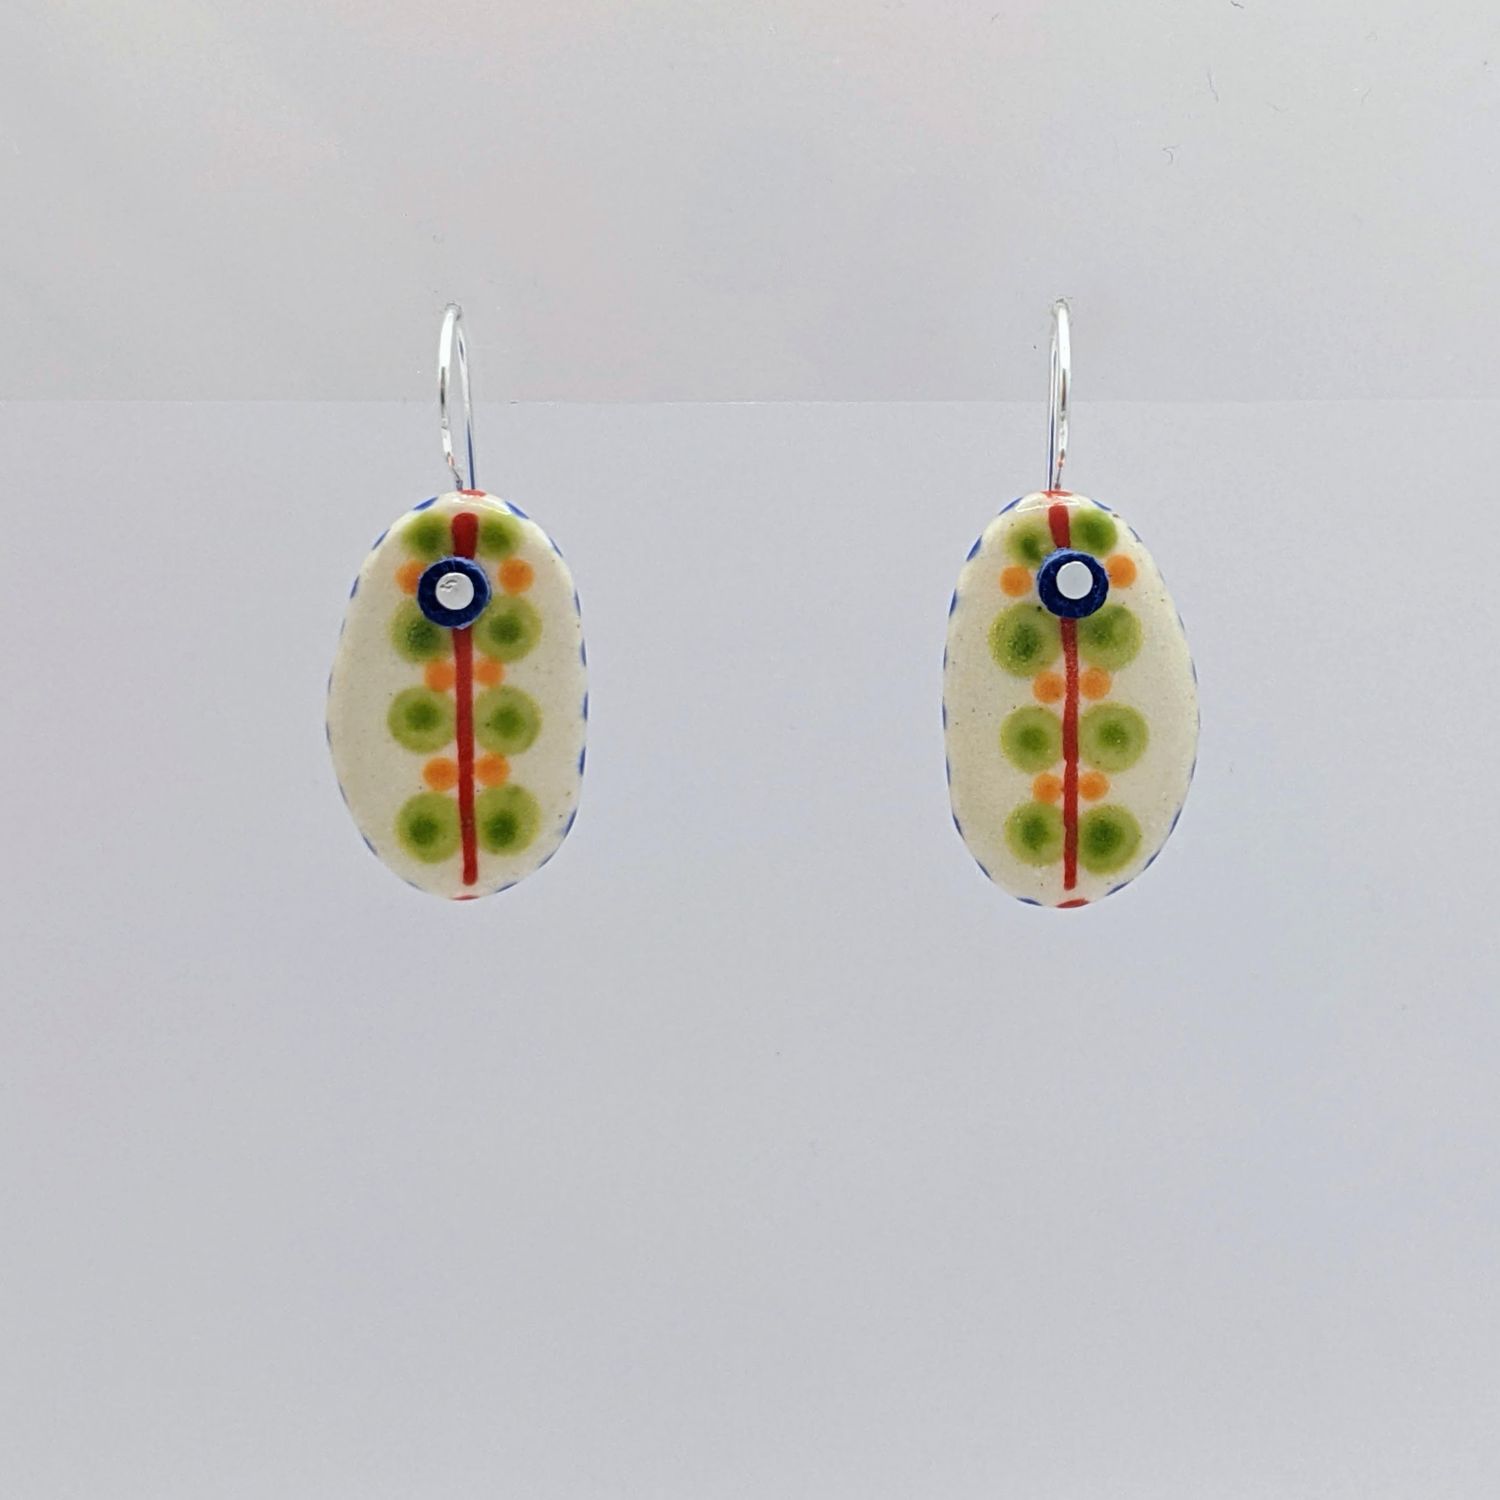 Here and Here: Green Dotted Ceramic Disc Earrings Product Image 2 of 4